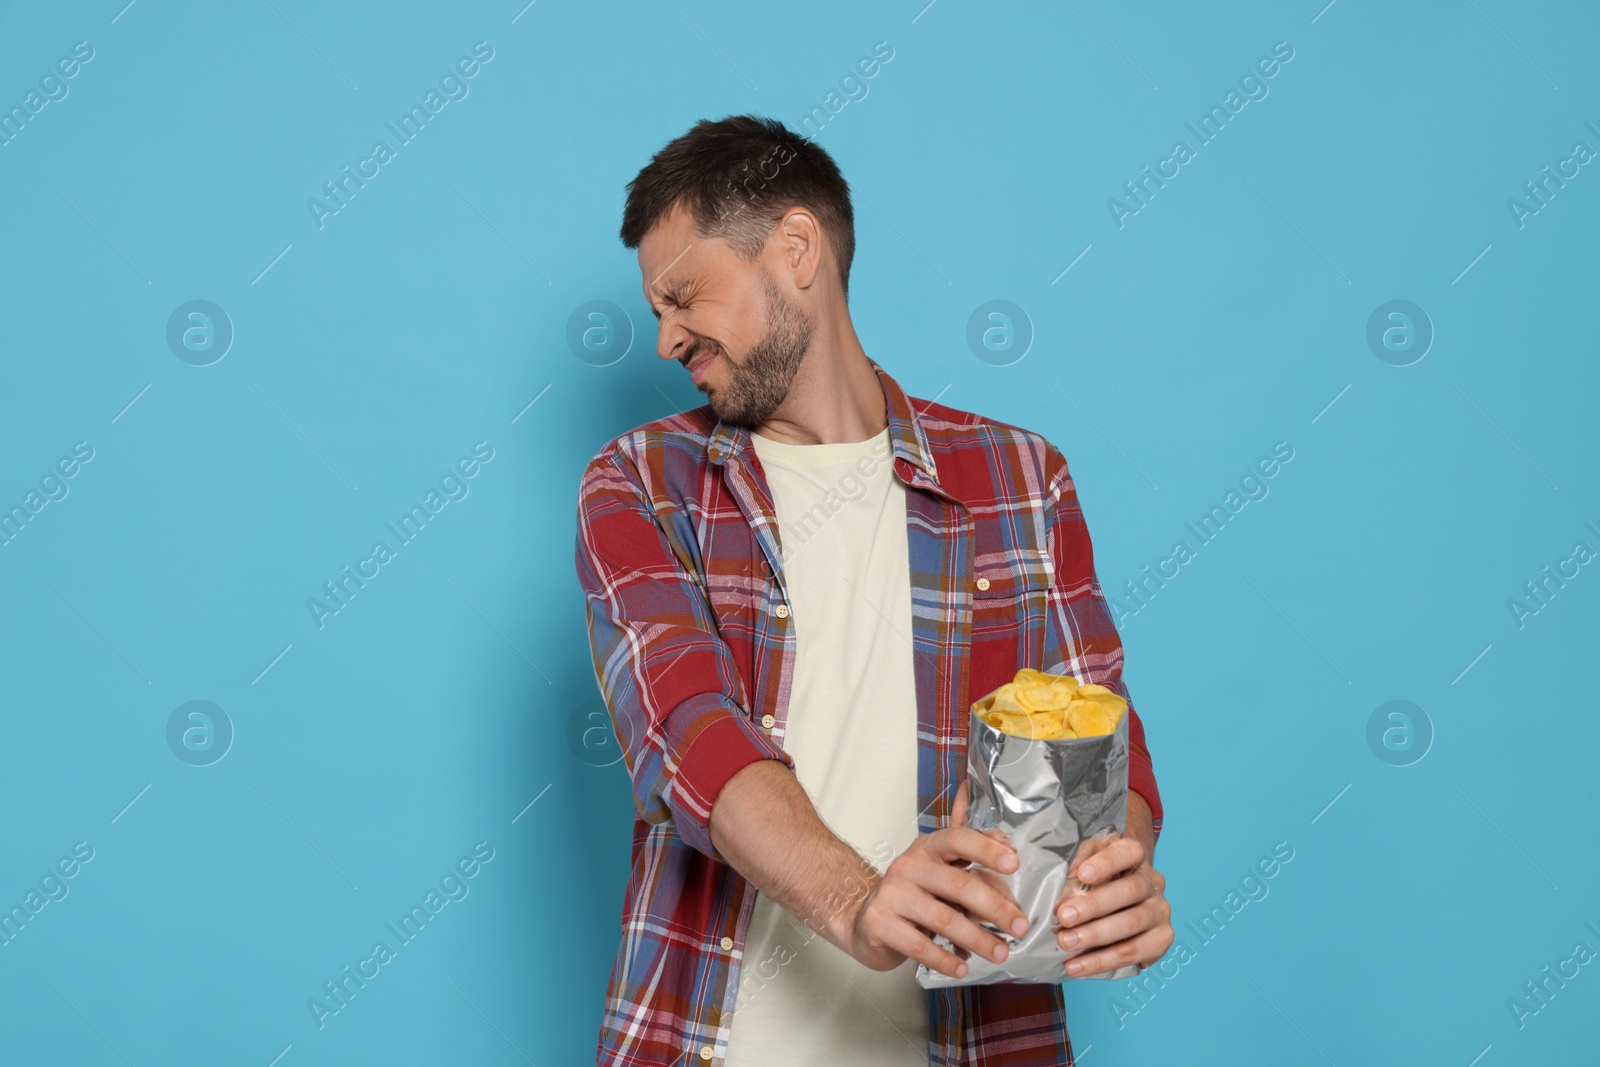 Photo of Handsome man refusing to eat potato chips on light blue background